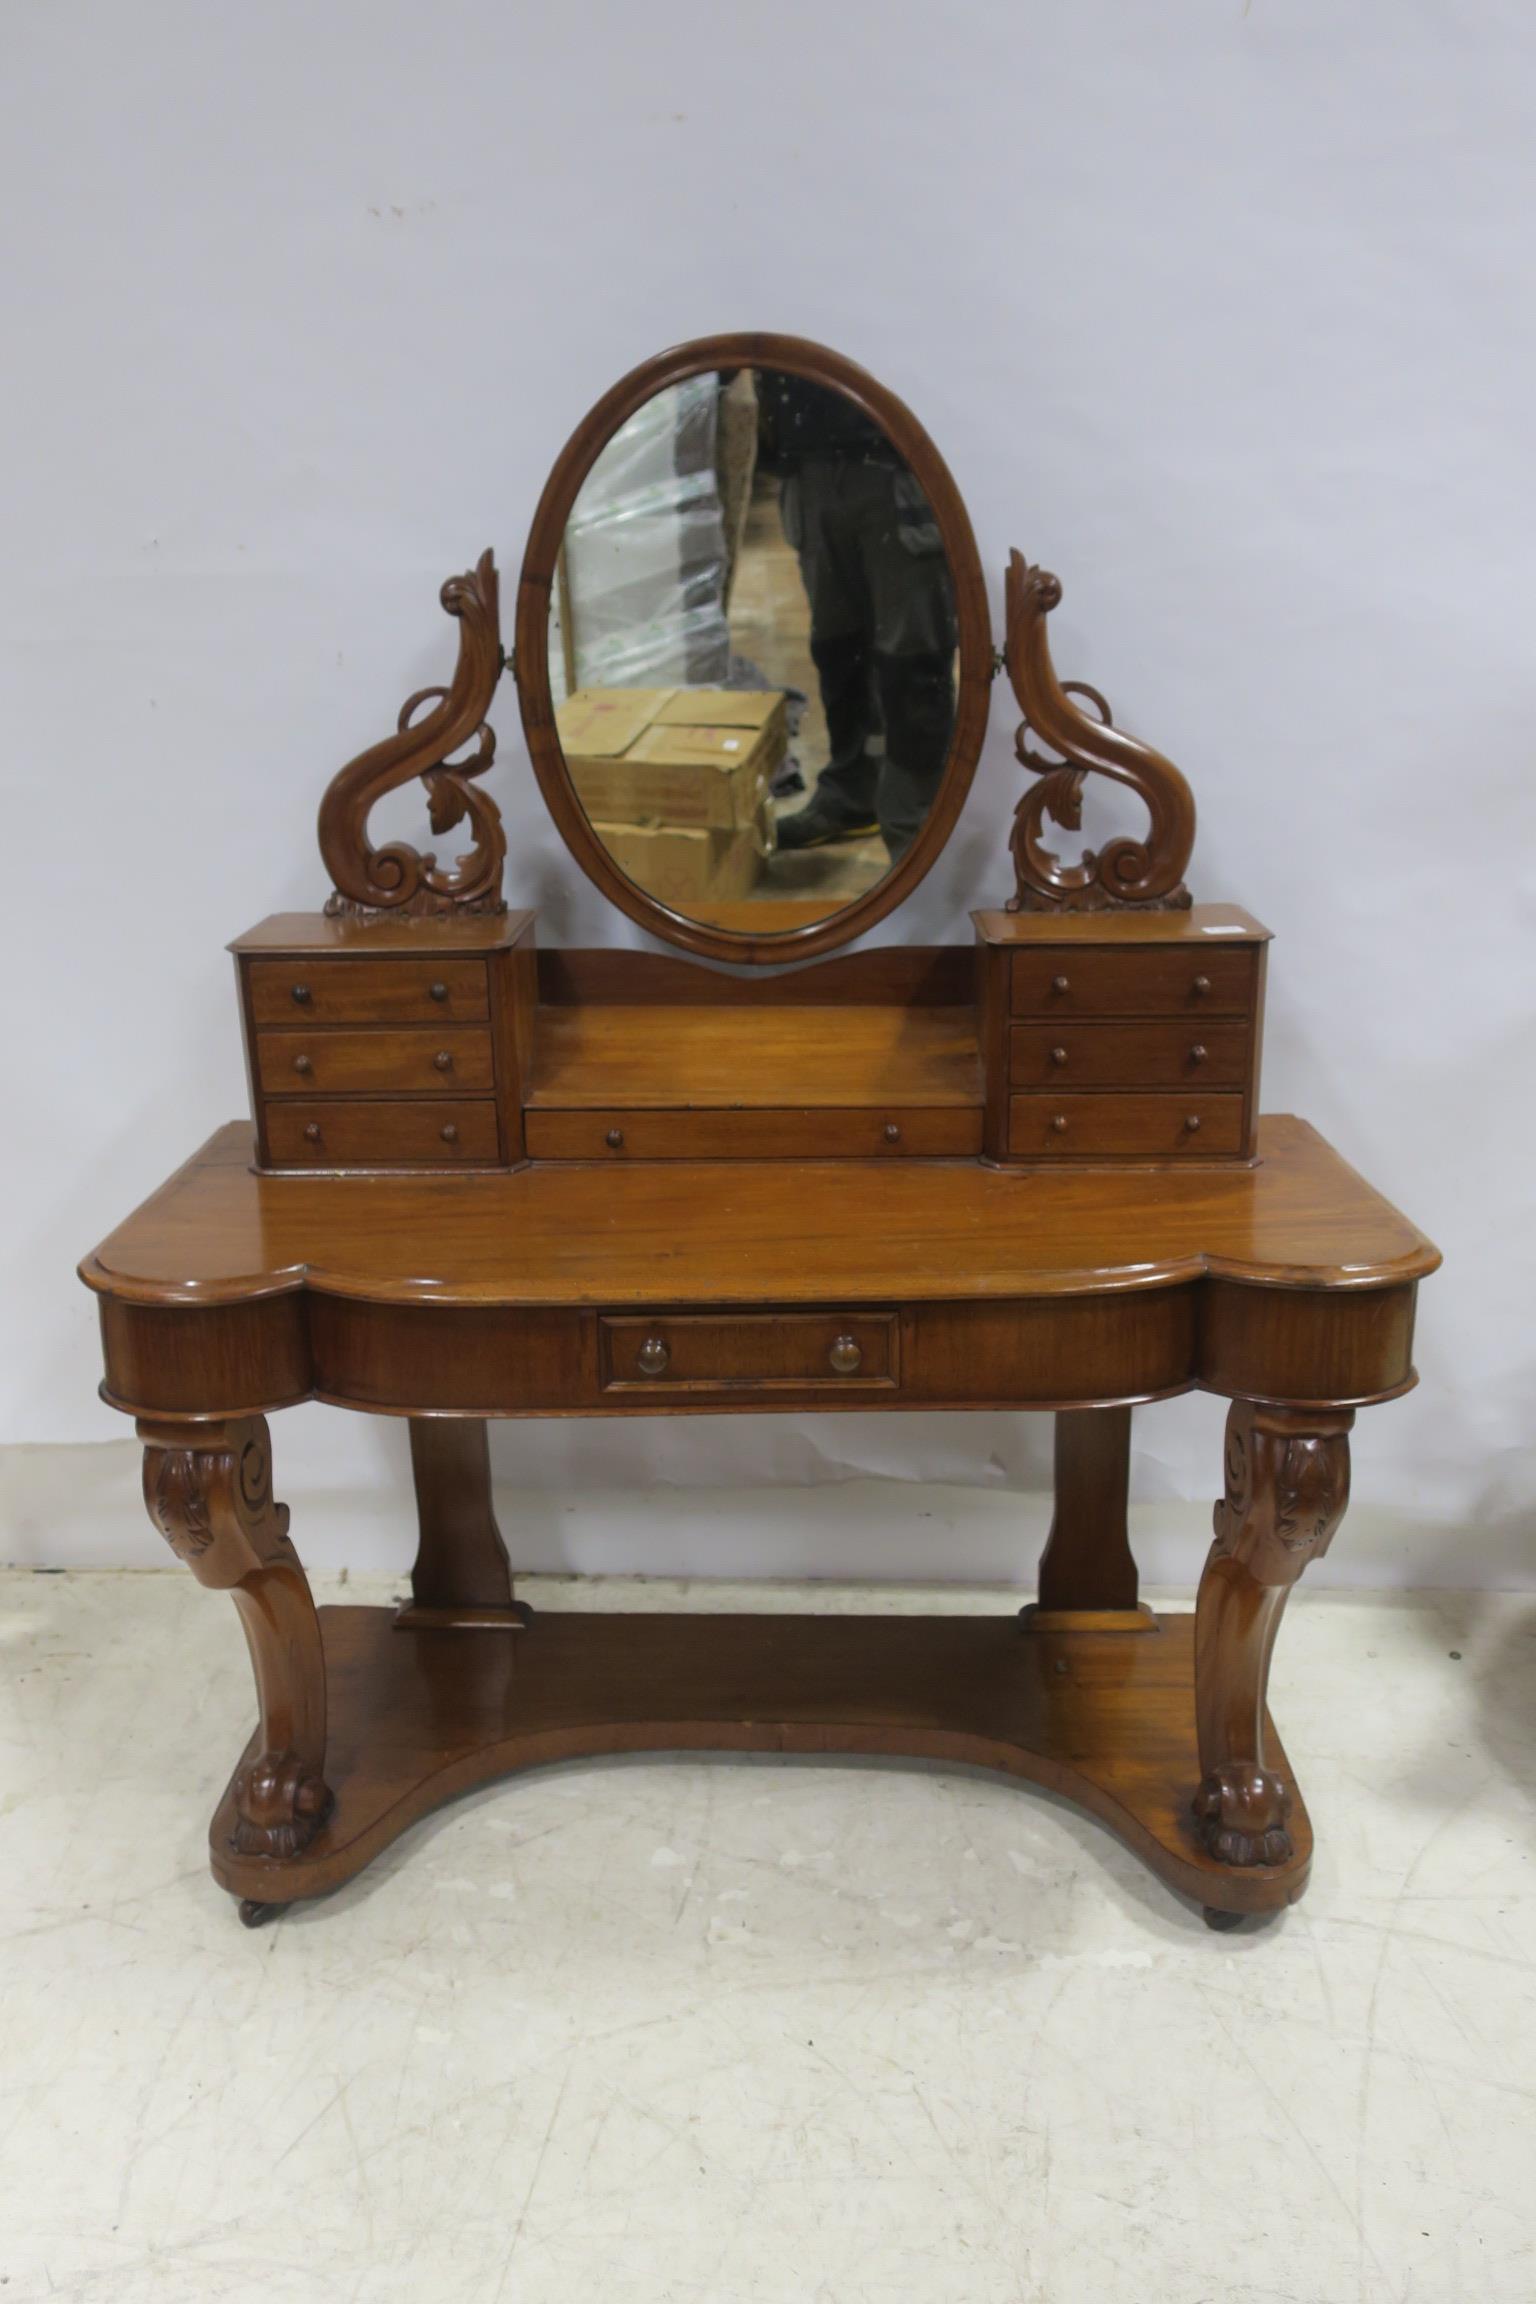 A 19TH CENTURY MAHOGANY DUCHESS DRESSING TABLE the superstructure with oval glass mirror flanked by